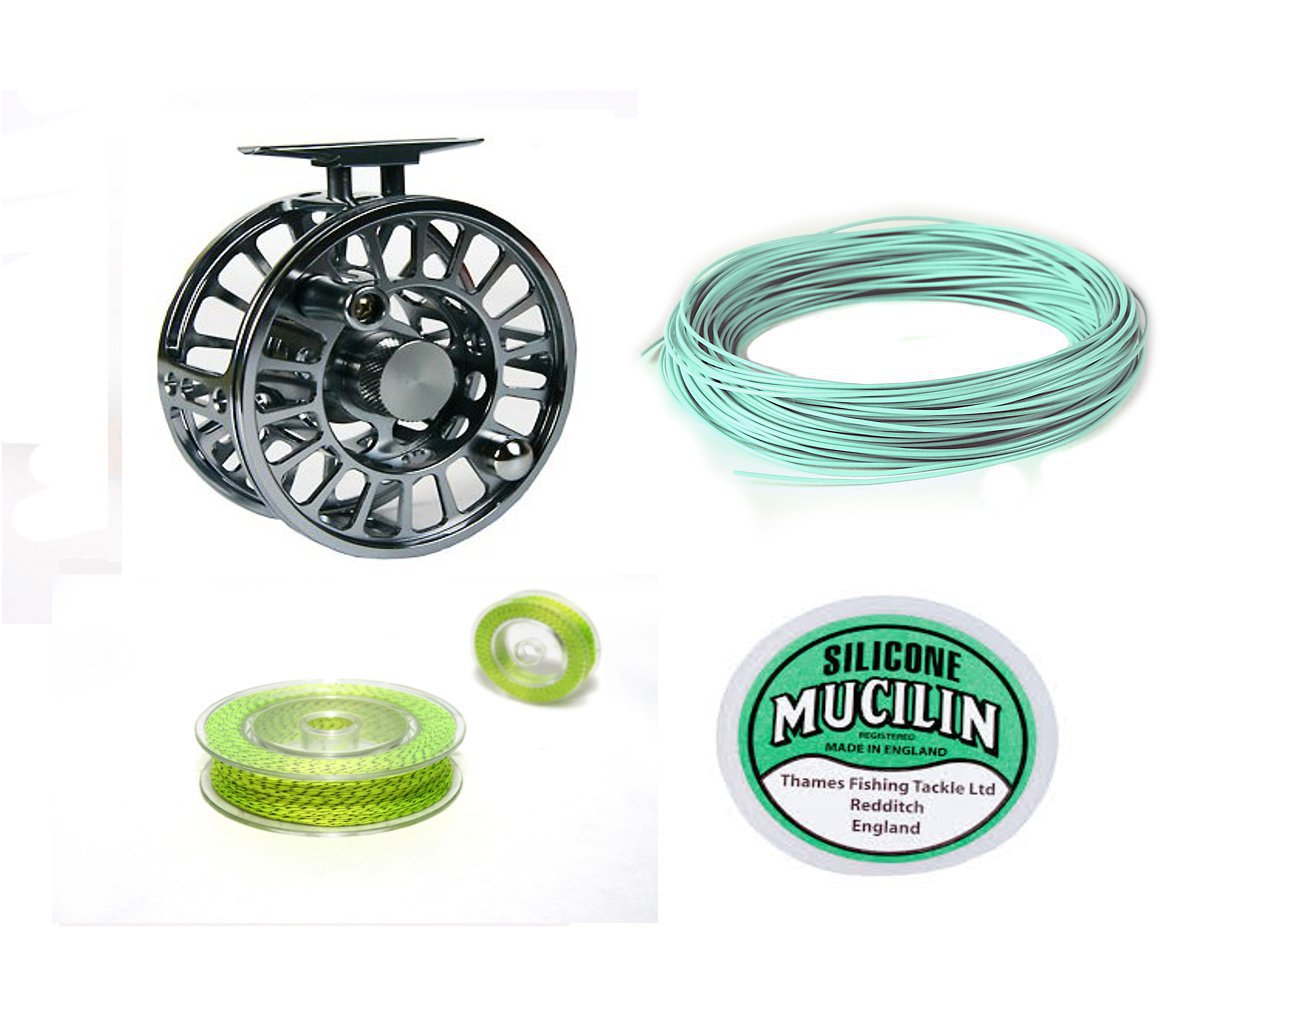 Fly reel “Salmon #10/12” with backing and running line